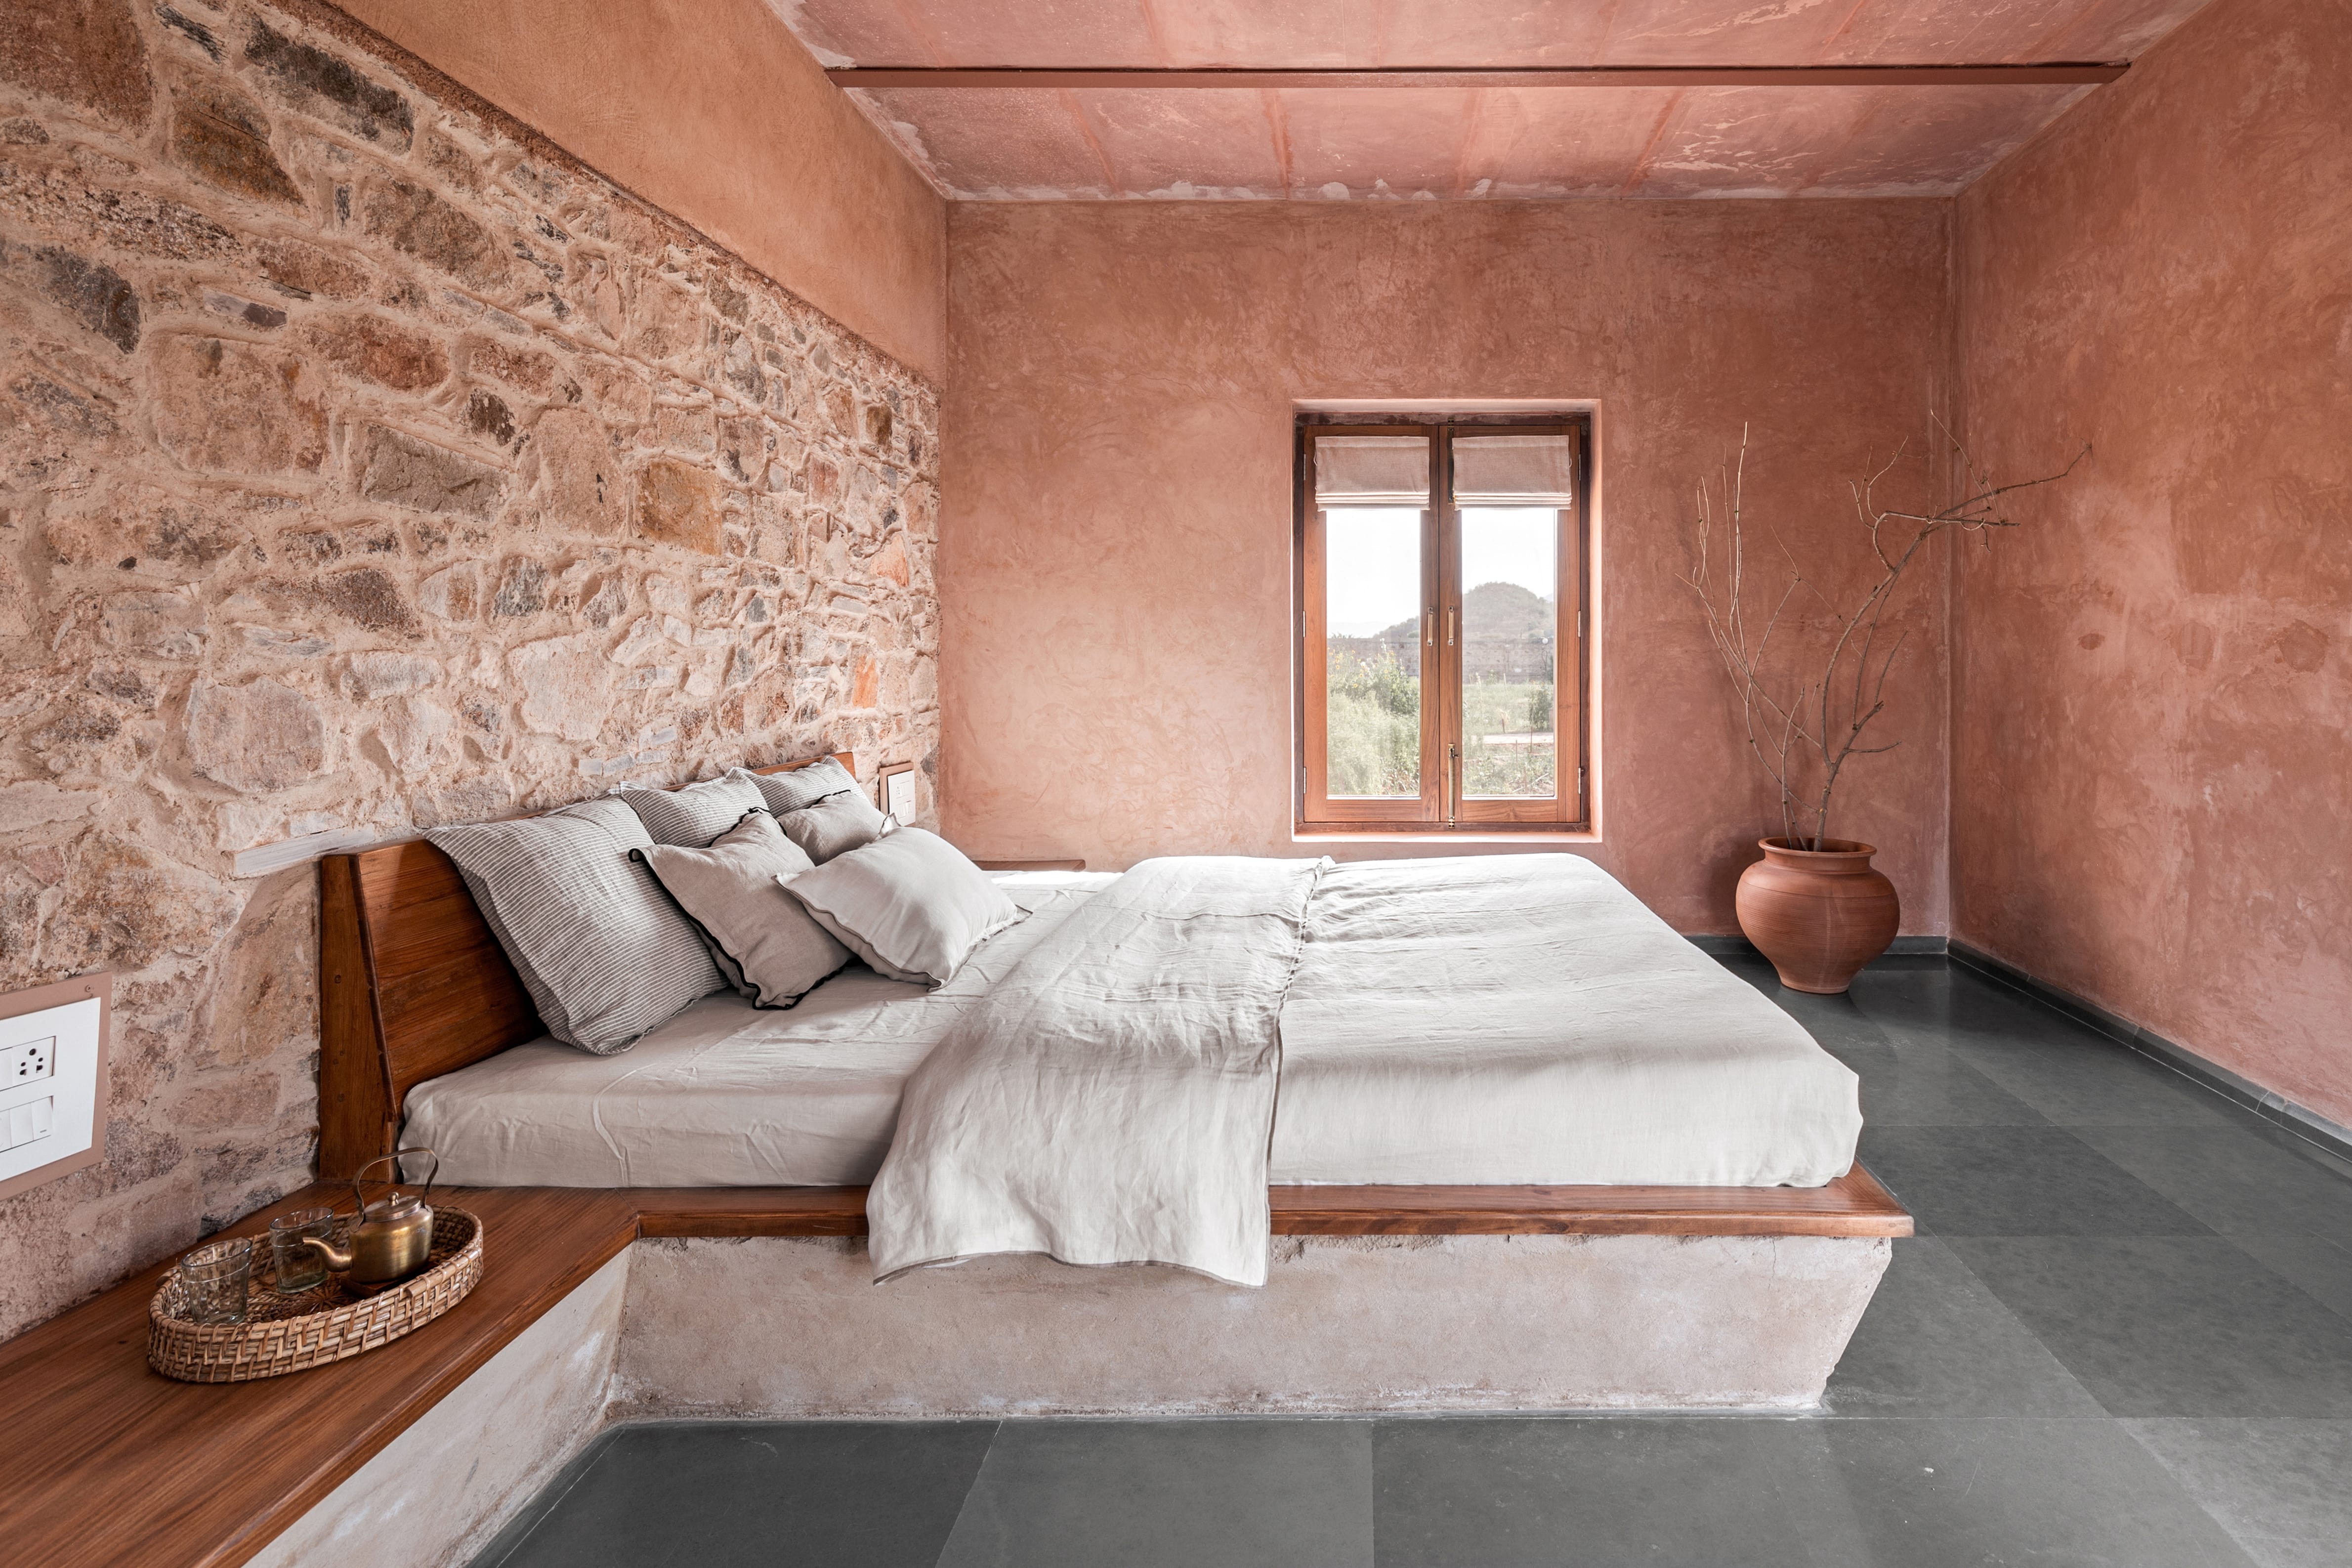 In the other bedroom, you can see the combination of two walls with different materials as the interior